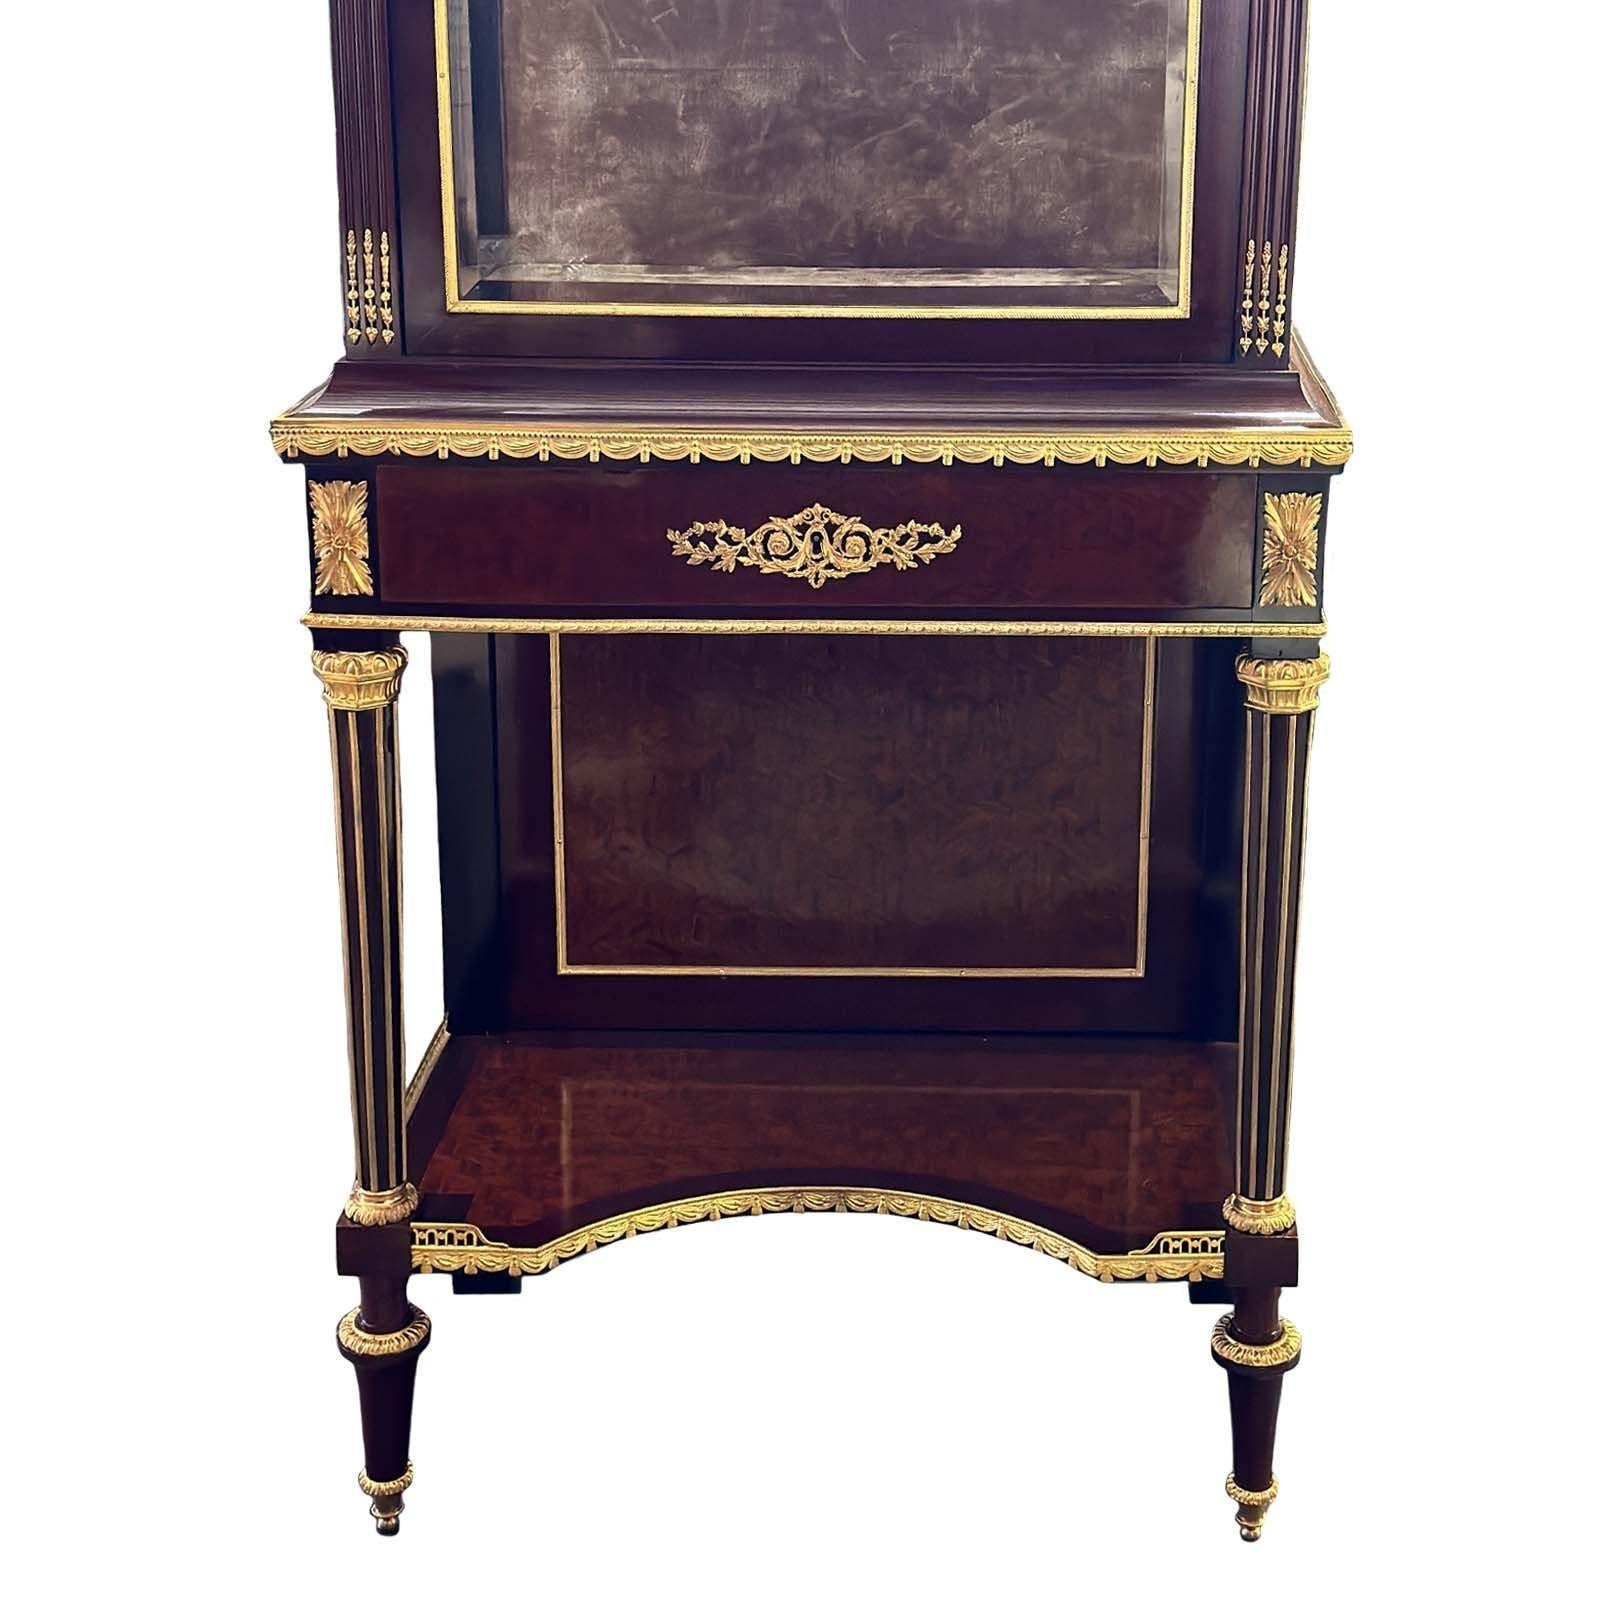 Magnificent French wooden Linke style vitrine with quality gilt bronze mounts and beveled glass. The interior is covered with velvet fabric, and the vitrine includes a key.
Dimensions:
80.5